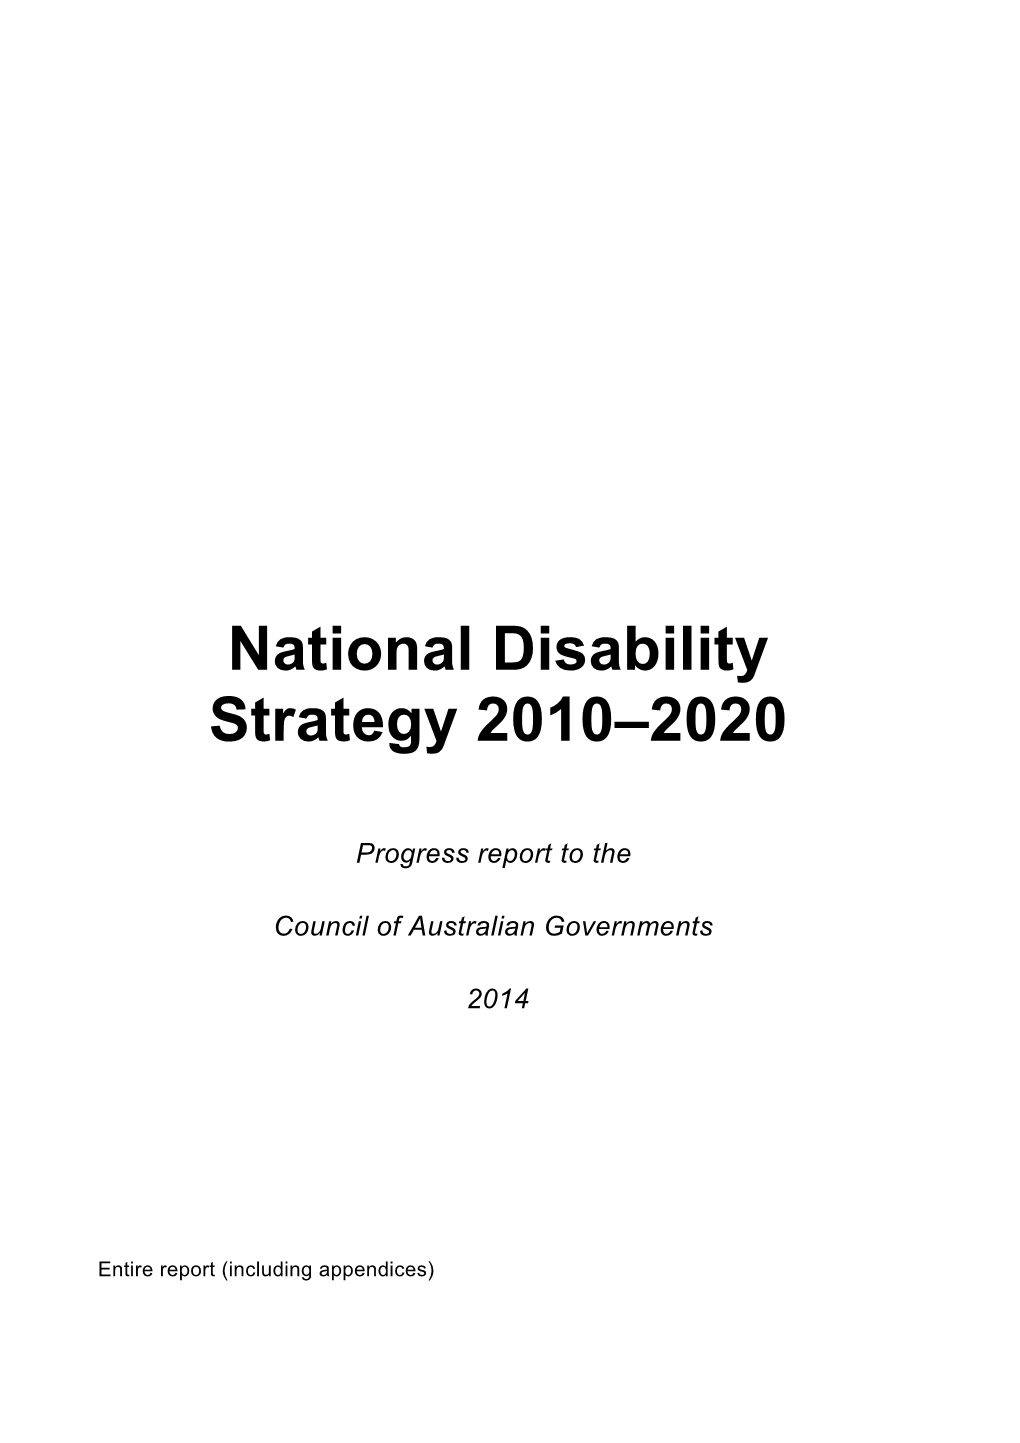 Progress Report to the Council of Australian Governments 2014